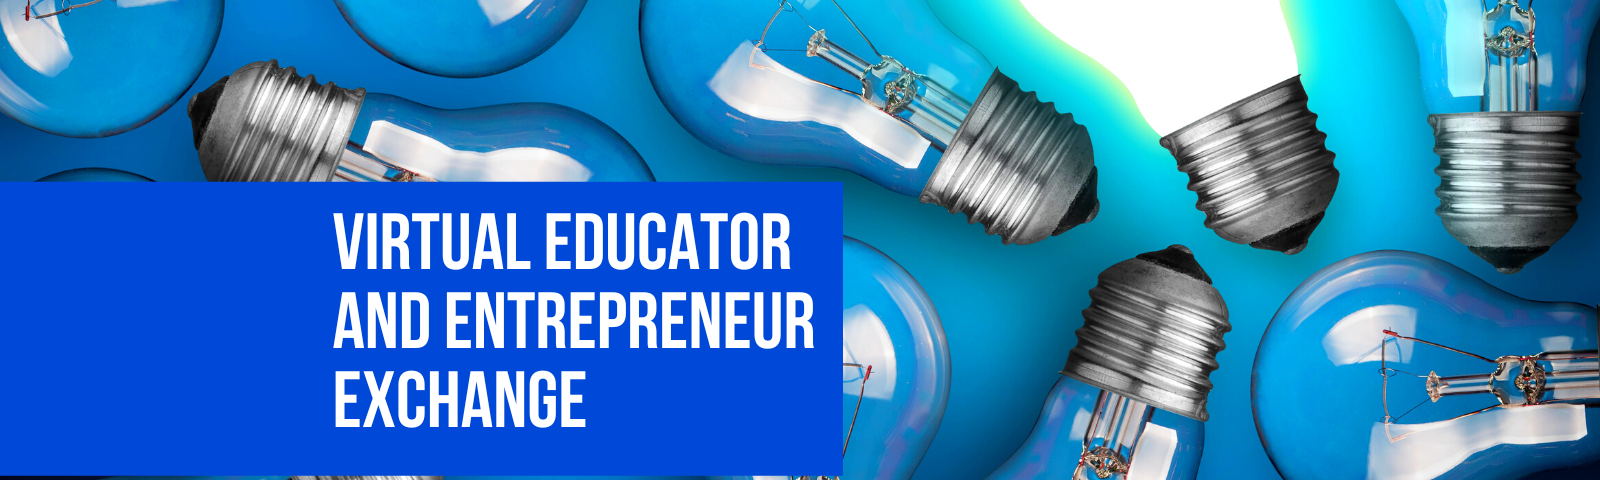 A few light bulbs with one that is illuminated. The text over the light bulbs reads “Virtual Educator and Entrepreneur Exchange”. Beneath the image there is the text “Hosted by GSV Ventures and Cambiar Catalyst”